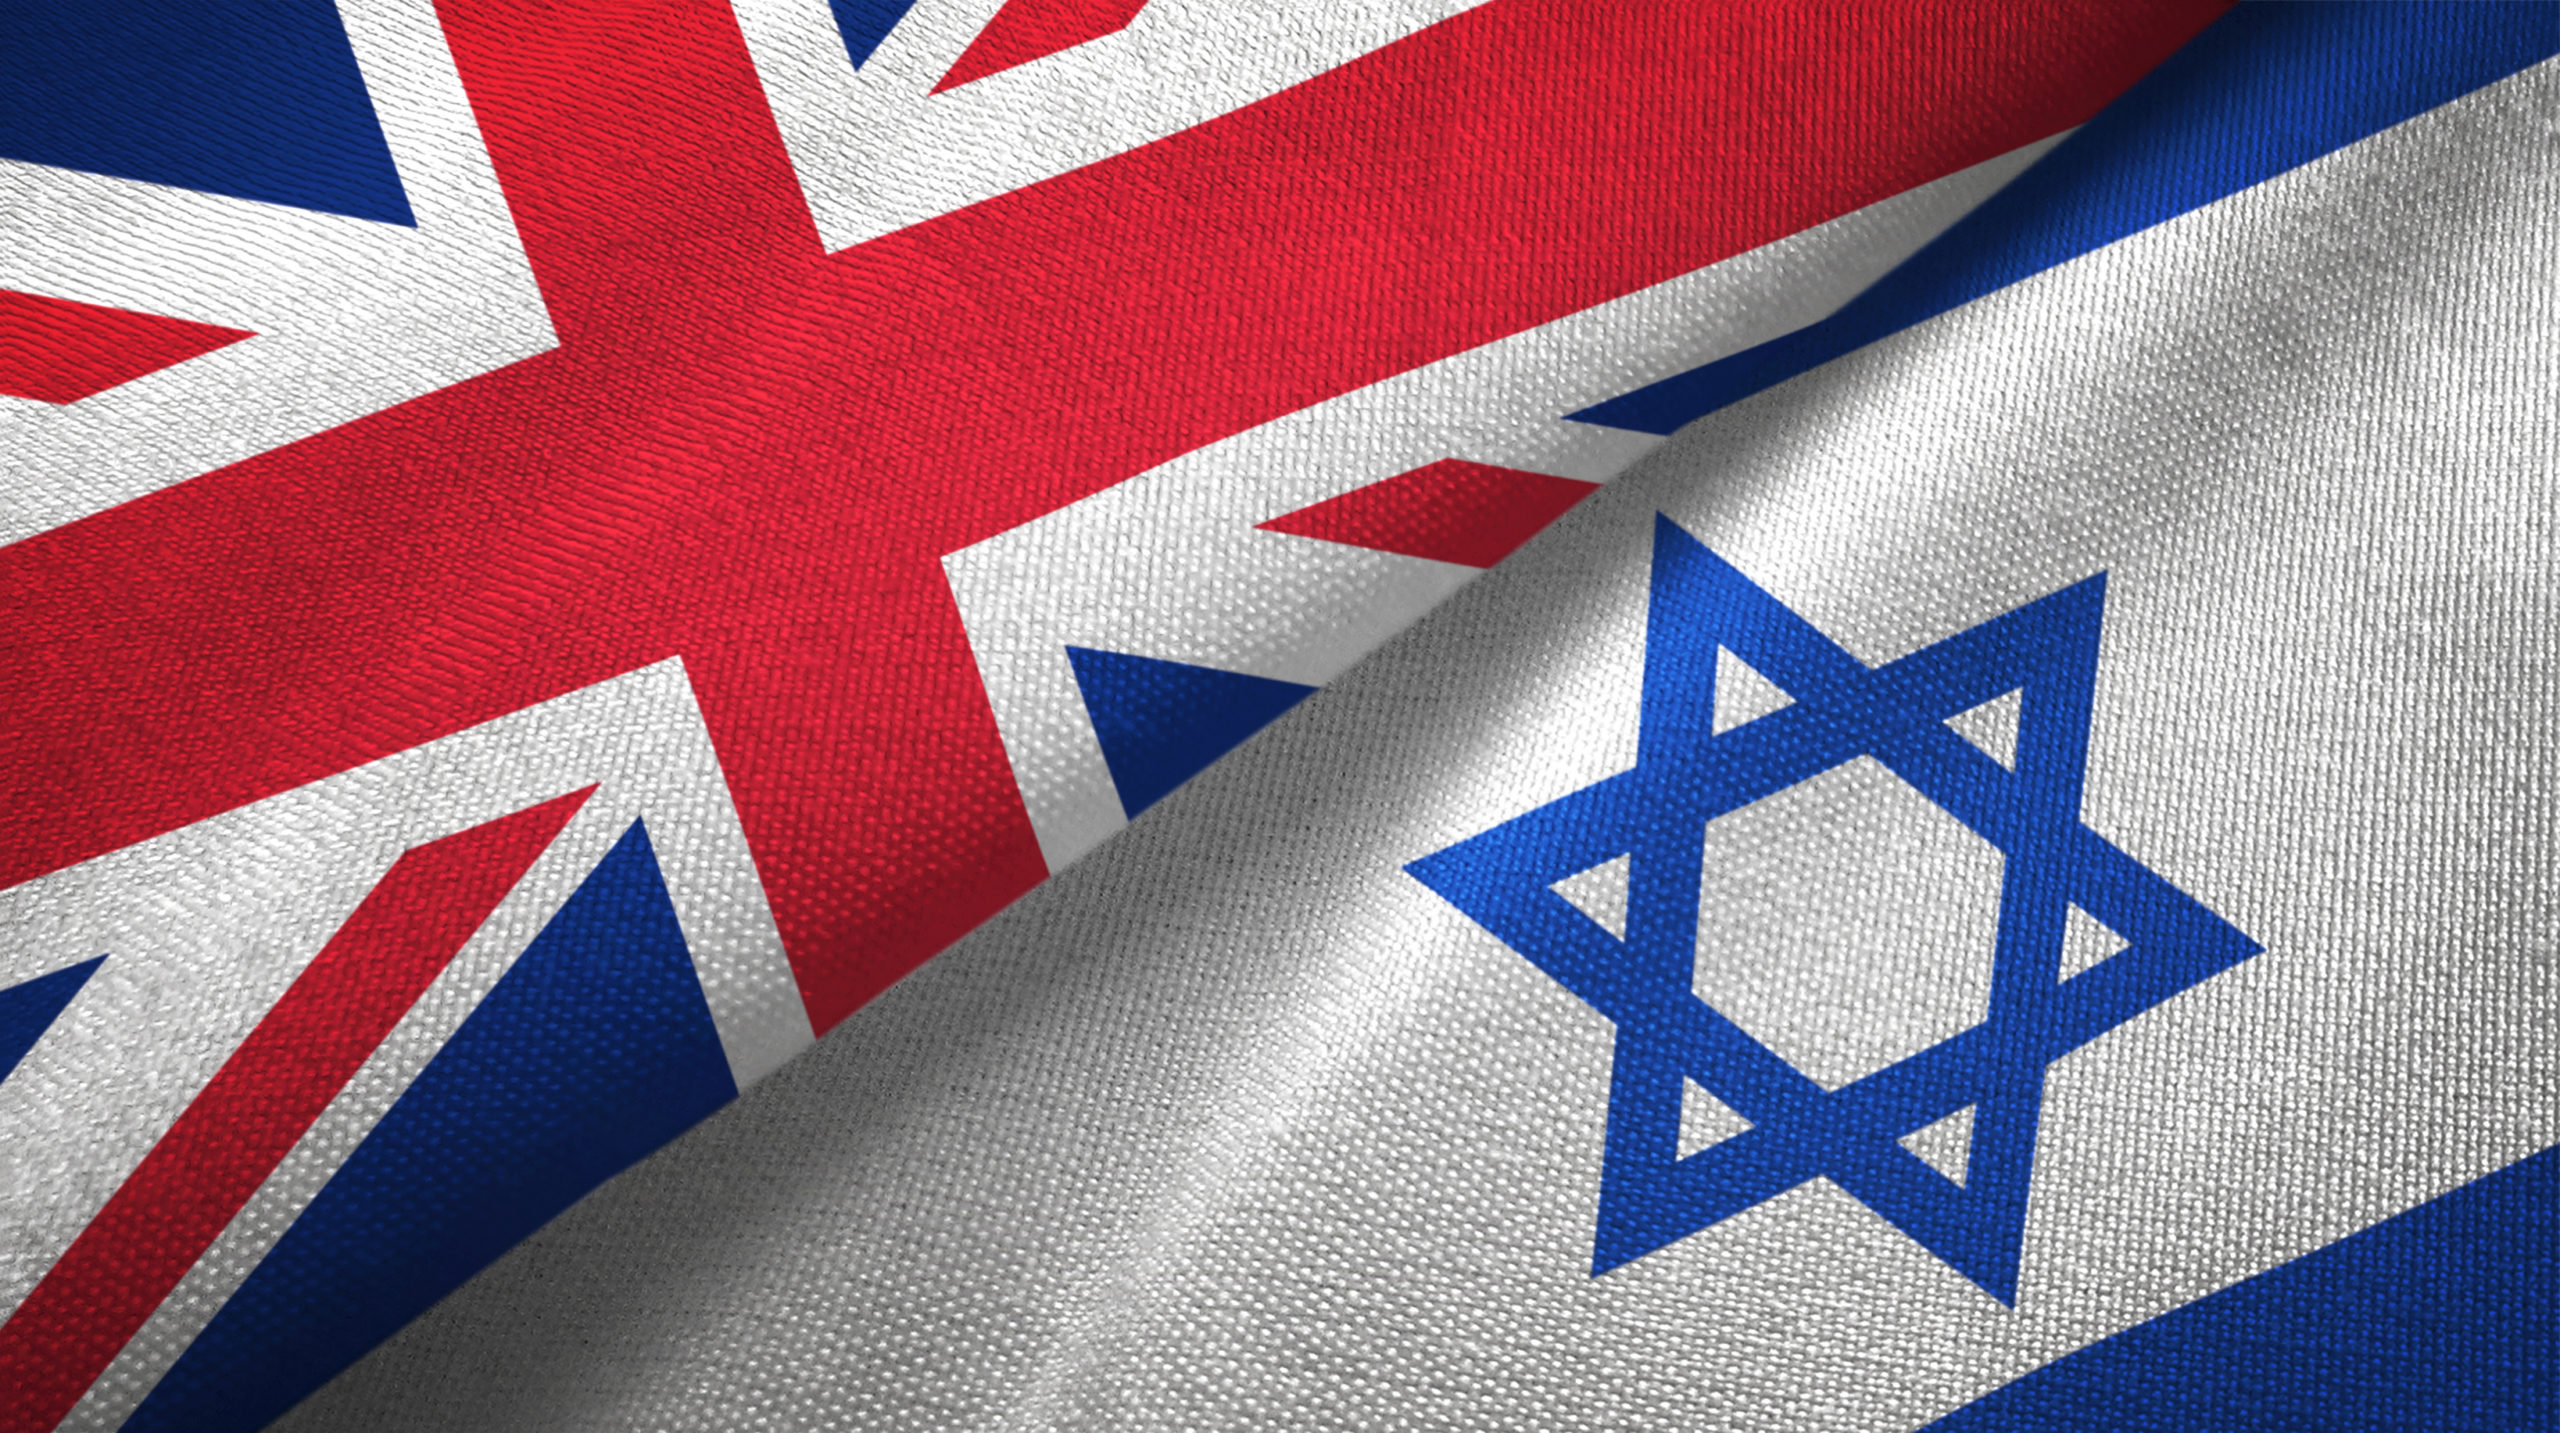 Innovate UK and Israel Innovation Authority to invest up to £4 million in innovation projects